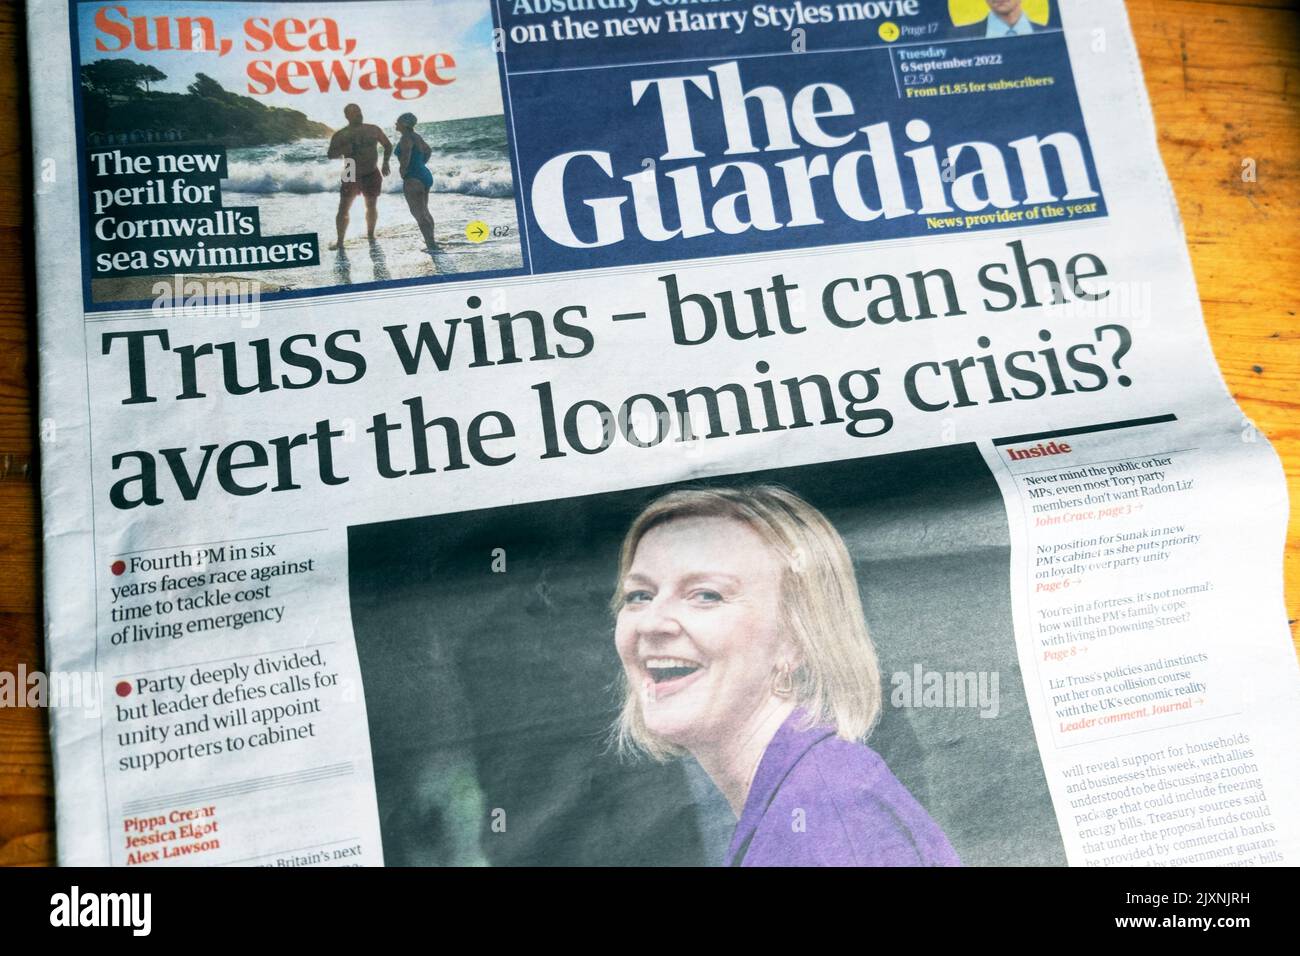 'Truss wins - but can she avert the looming crisis?' The Guardian newspaper headline front page Tory PM leadership race 6 September 2022 London UK Stock Photo